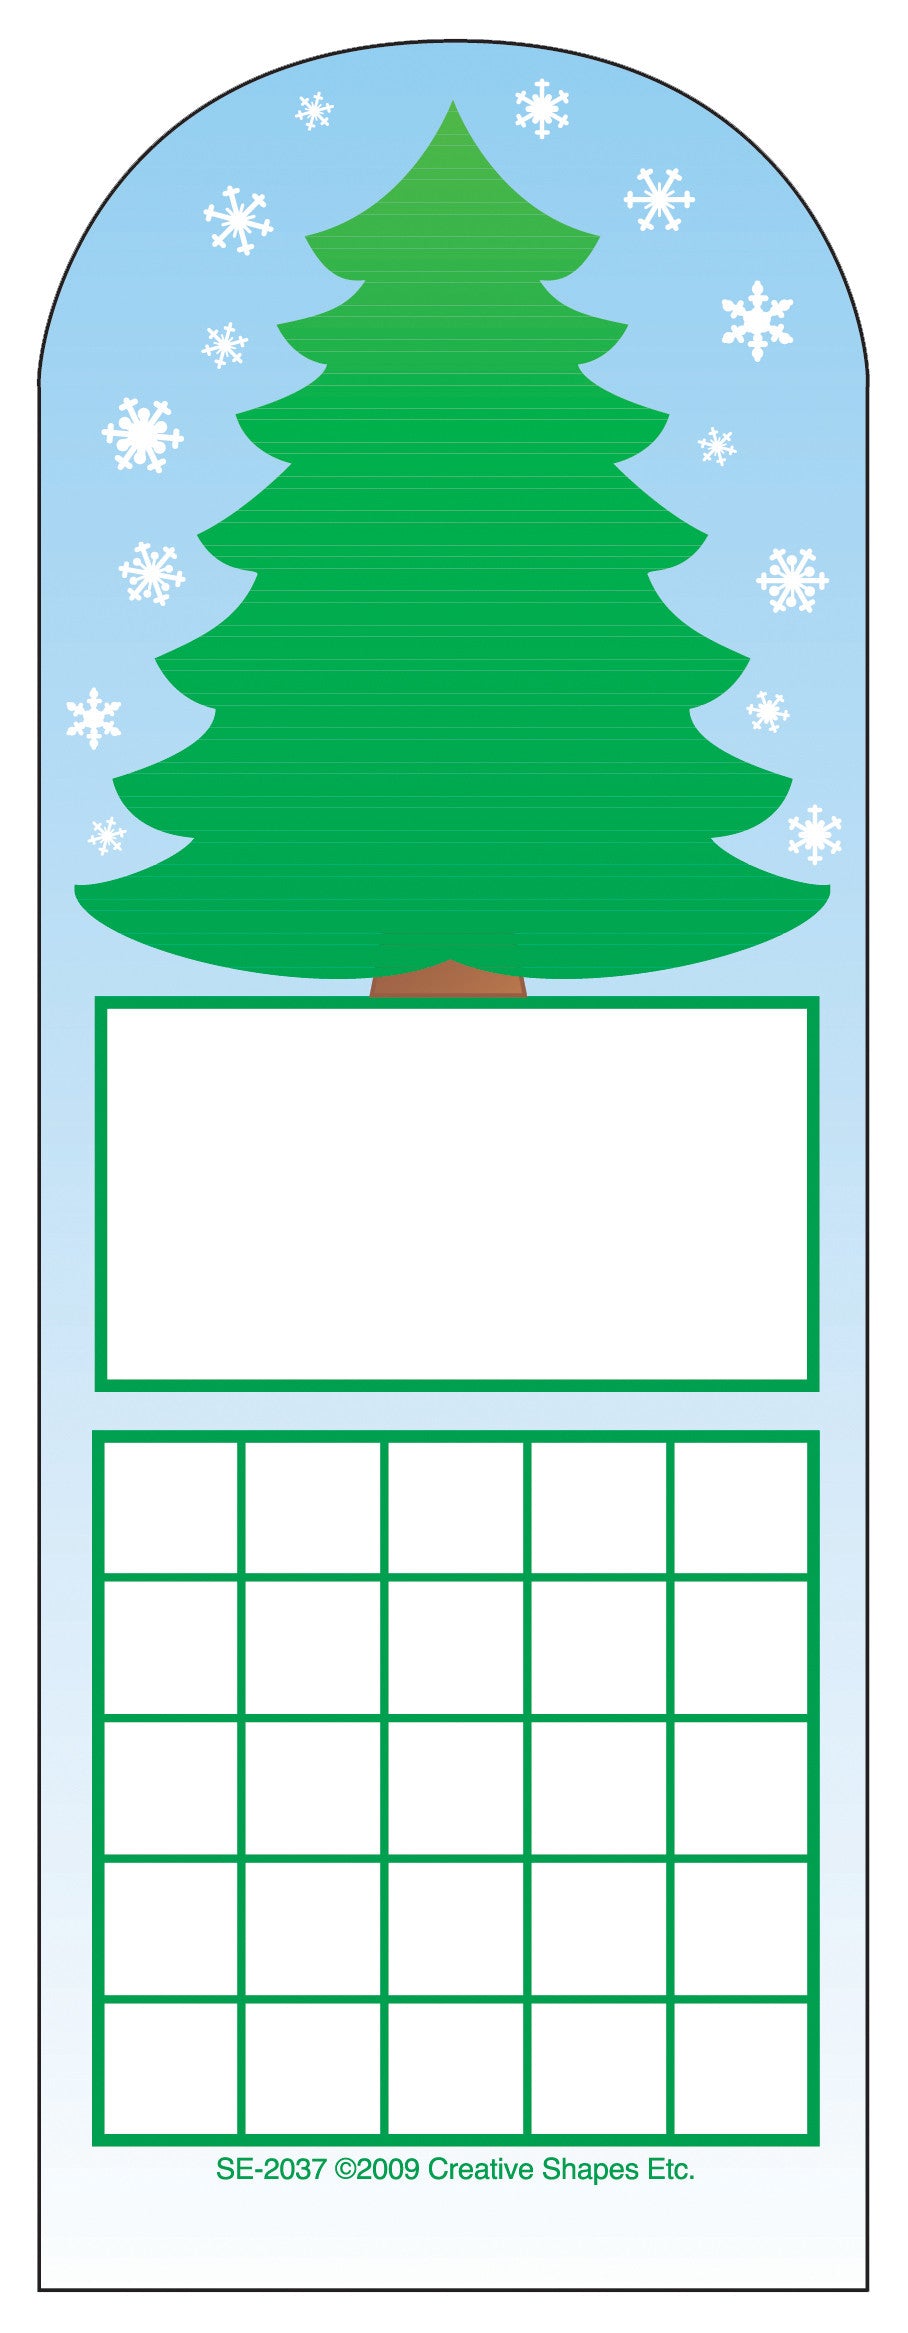 Personal Incentive Chart - Fir Tree - Creative Shapes Etc.